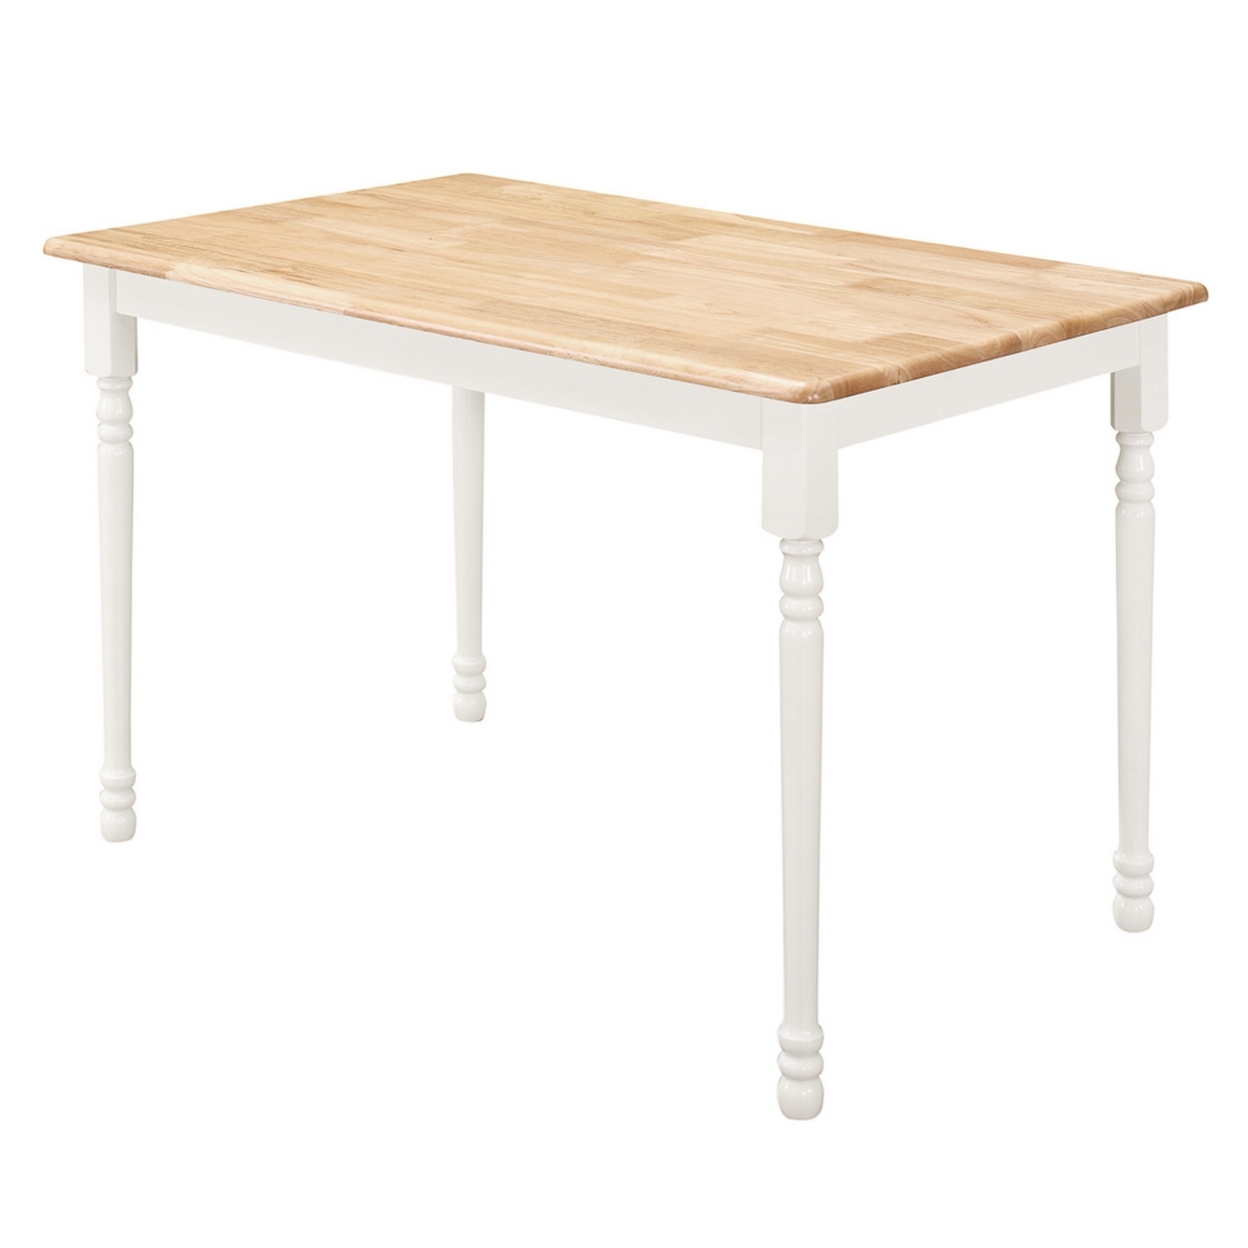 Cottage Style Dining Table With Turned Legs, Natural Brown And White- Saltoro Sherpi